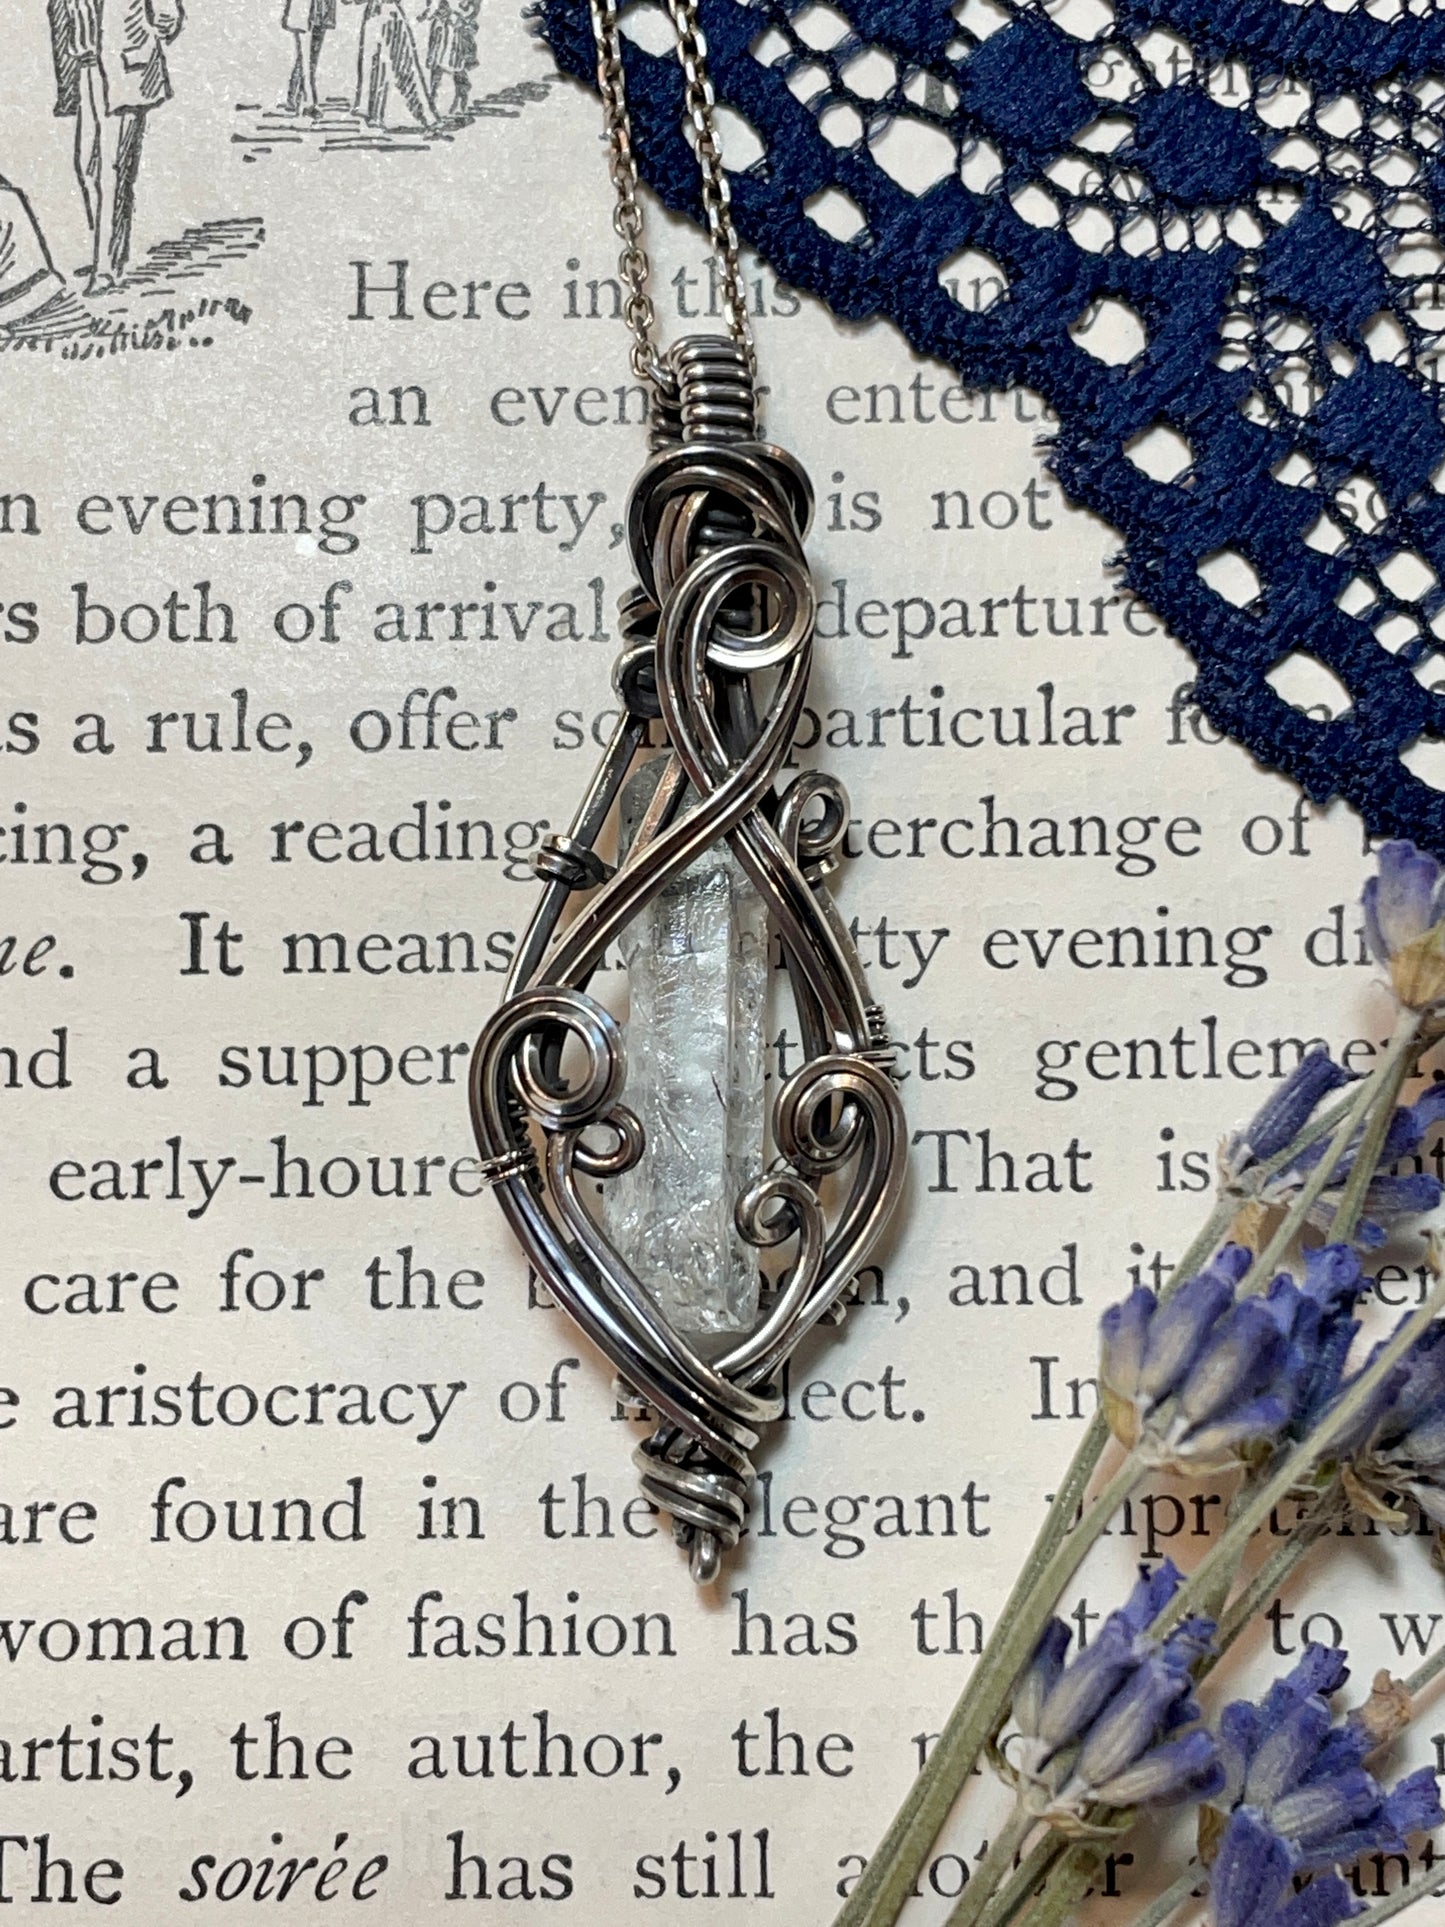 Natural Raw Aquamarine Pendant in Sterling Silver #2